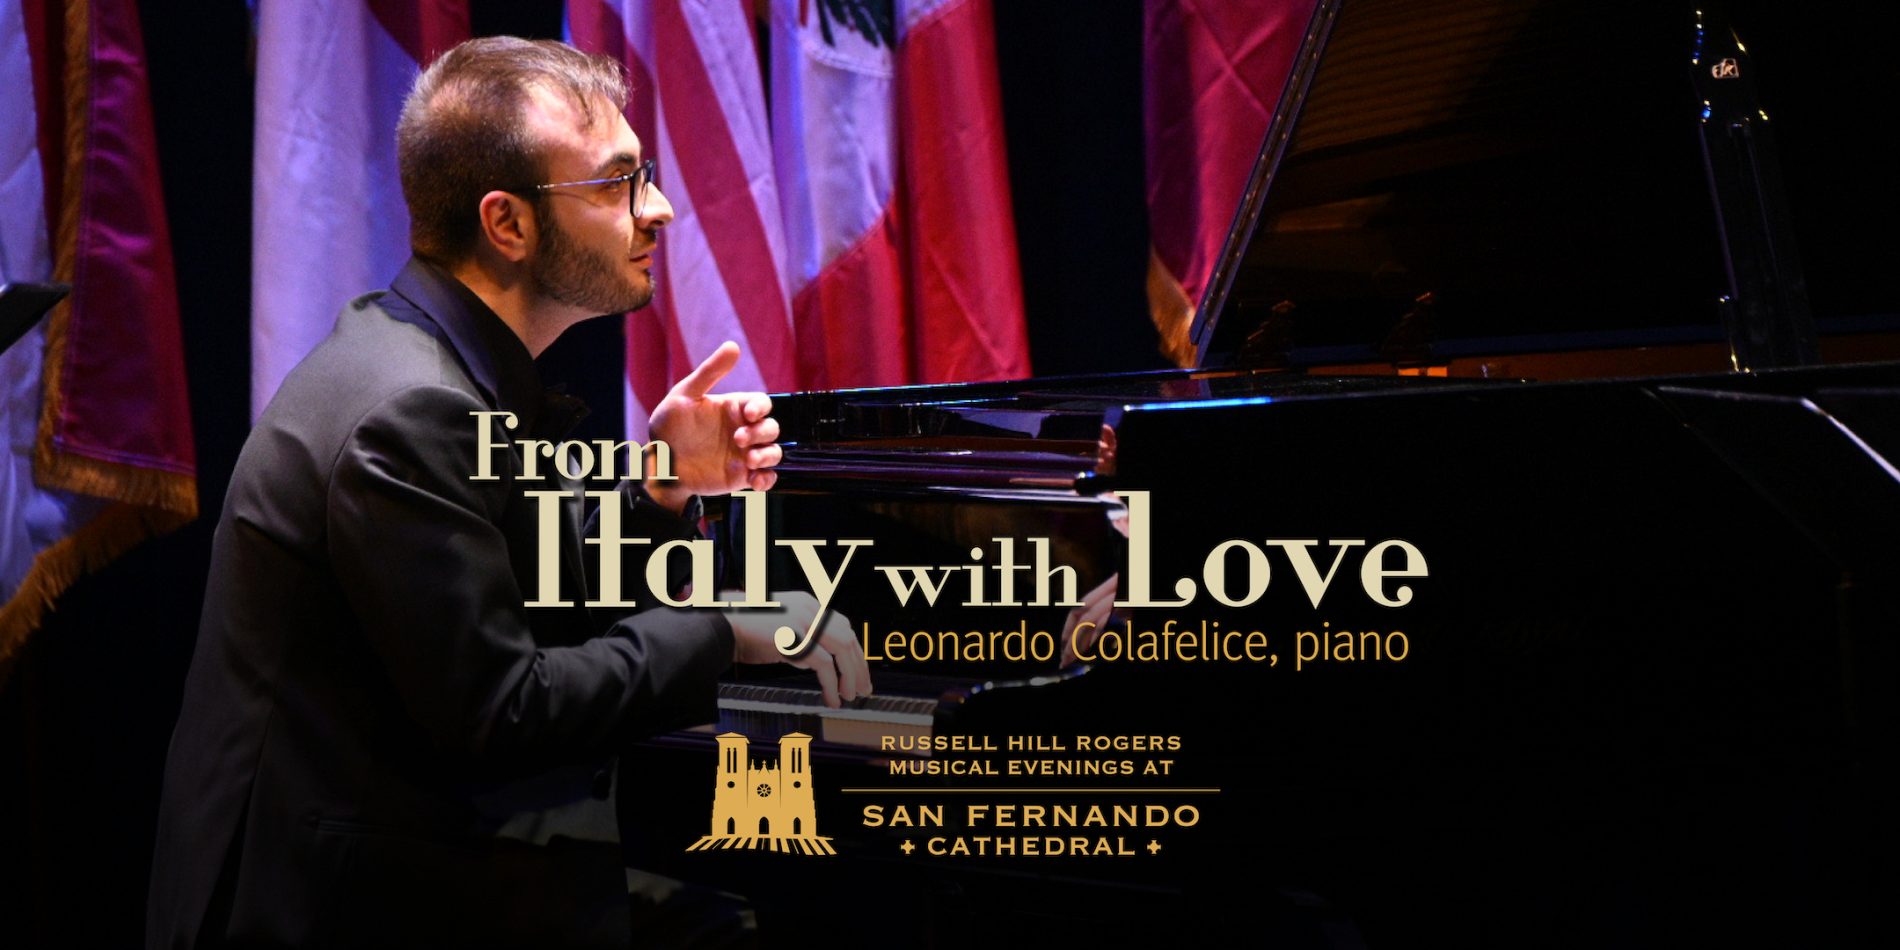 Gallery 1 - From Italy With Love | Russell Hill Rogers Musical Evenings at San Fernando Cathedral